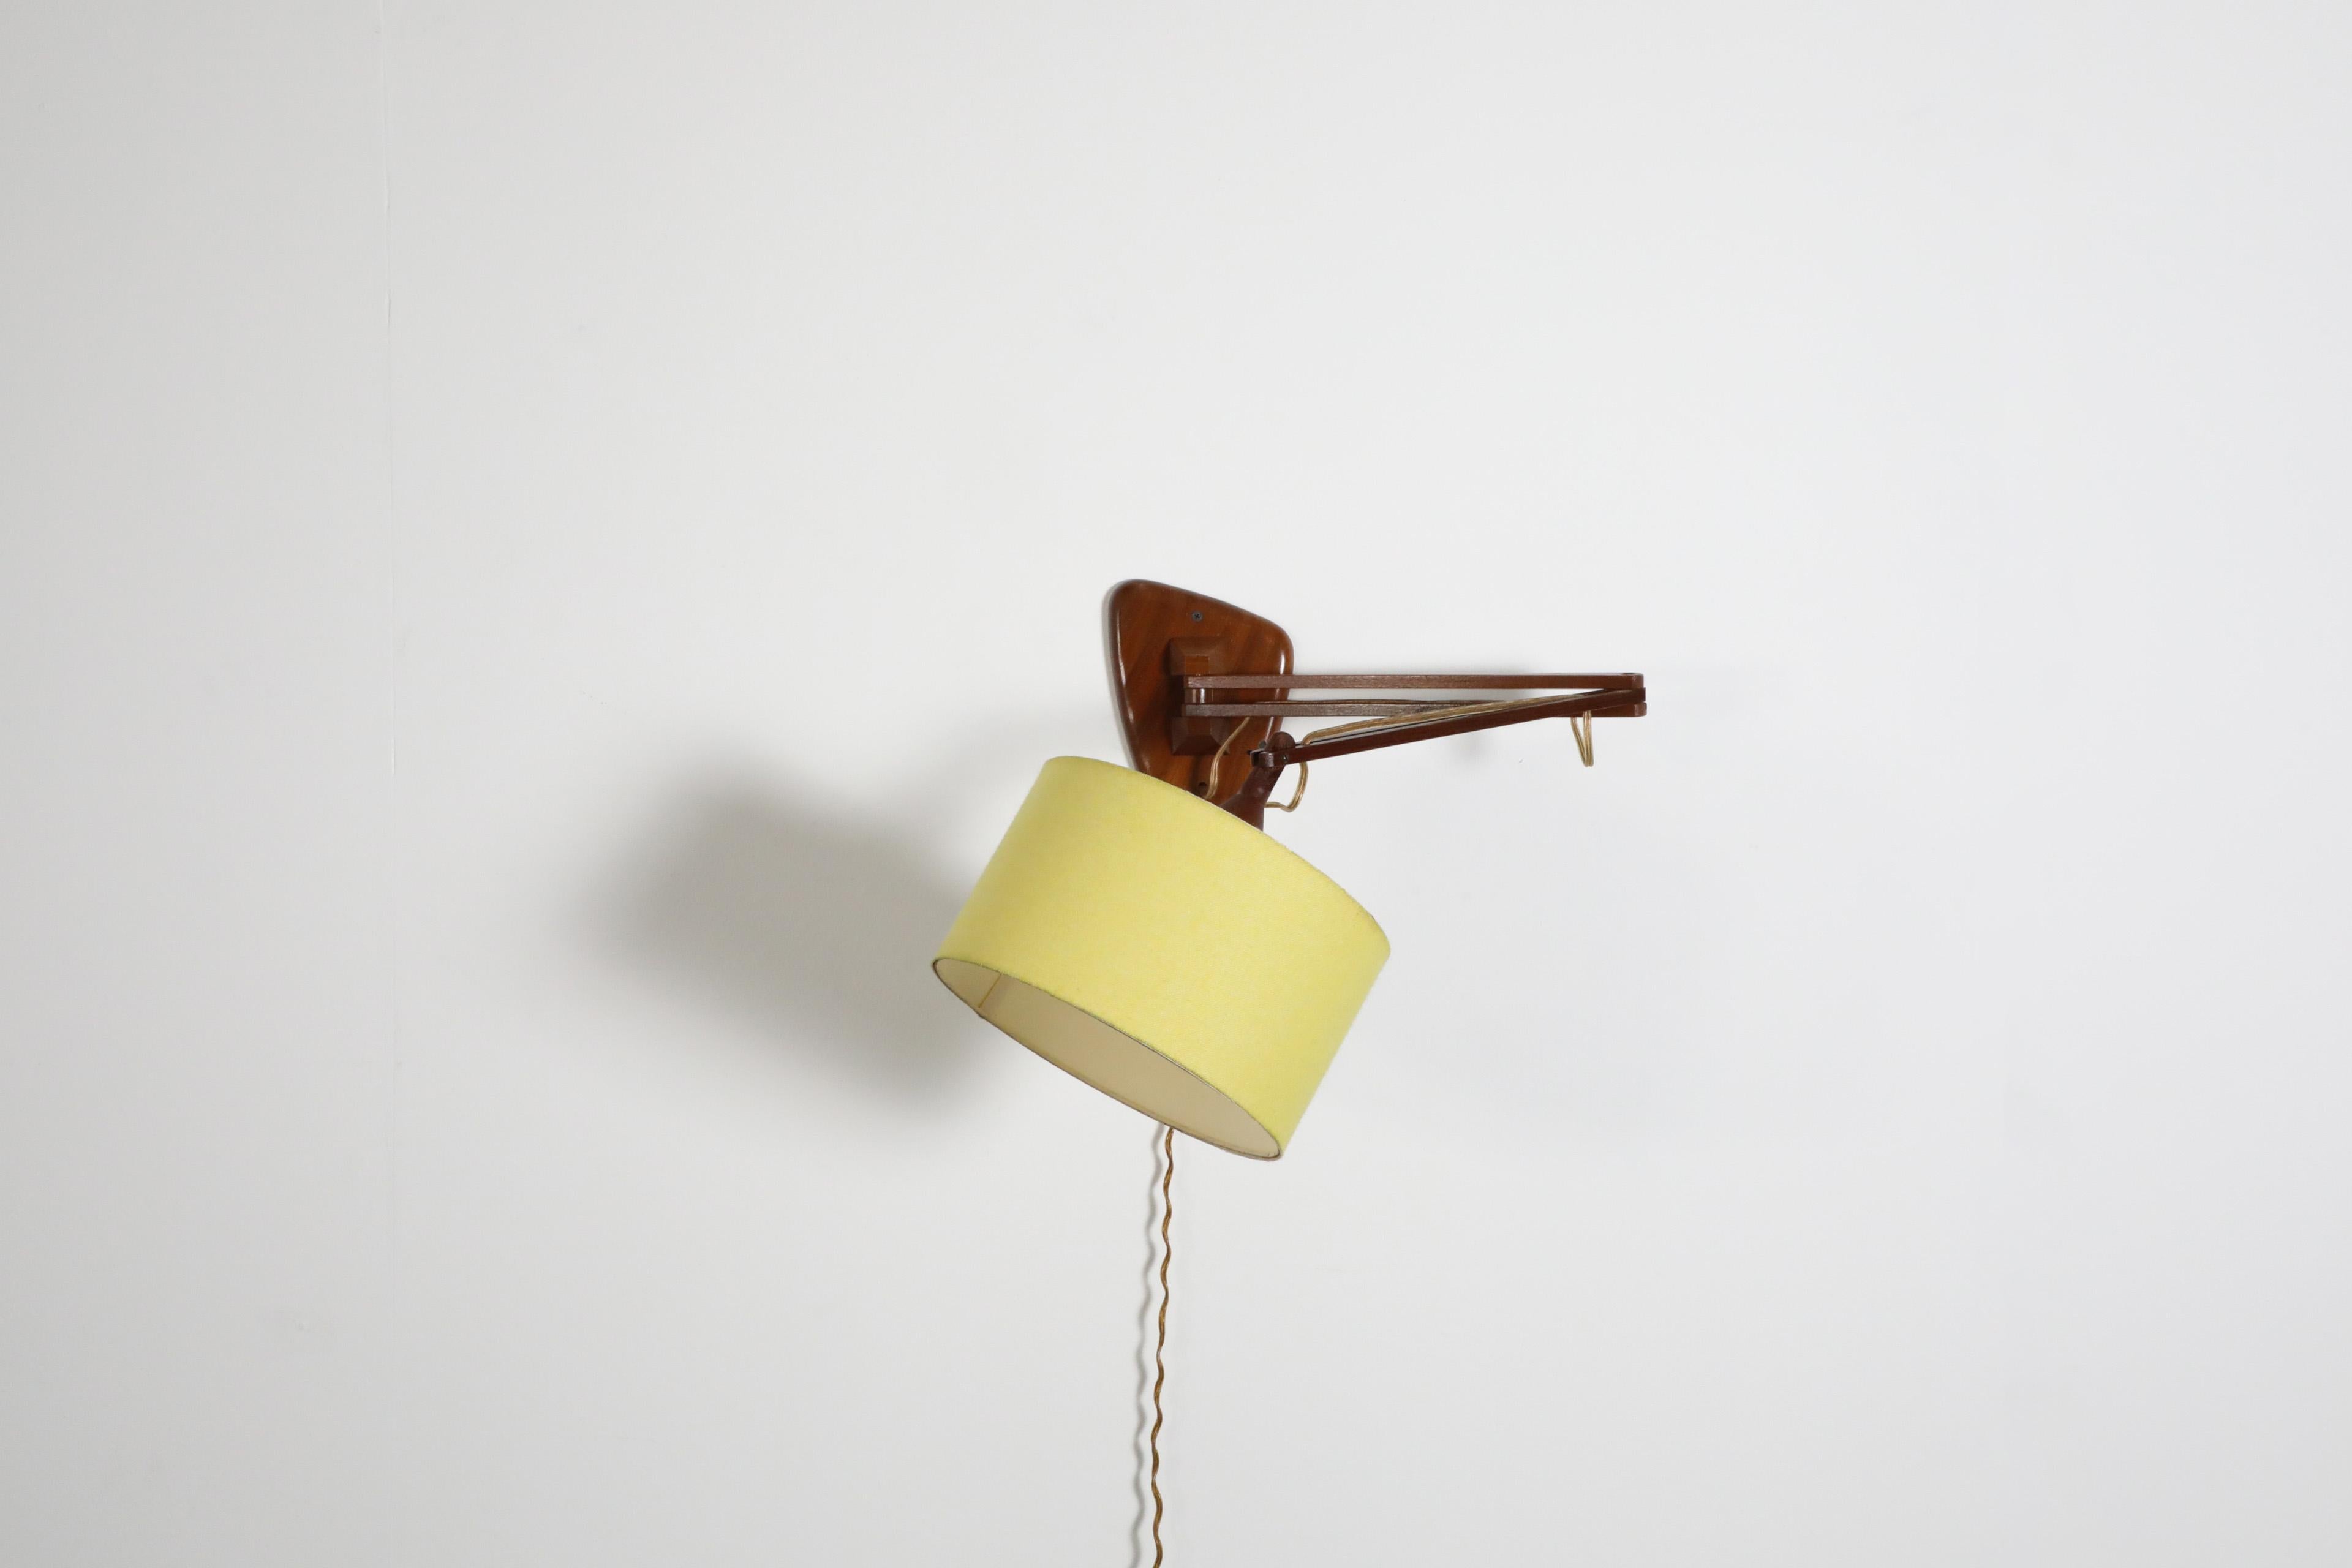 Mid-Century, Rupprecht Skrip style, teak wall lamp with matching triangular mount and articulating arm. An adjustable and functional lamp with yellow fabric shade and white button switch. In original condition with visible wear consistent with its